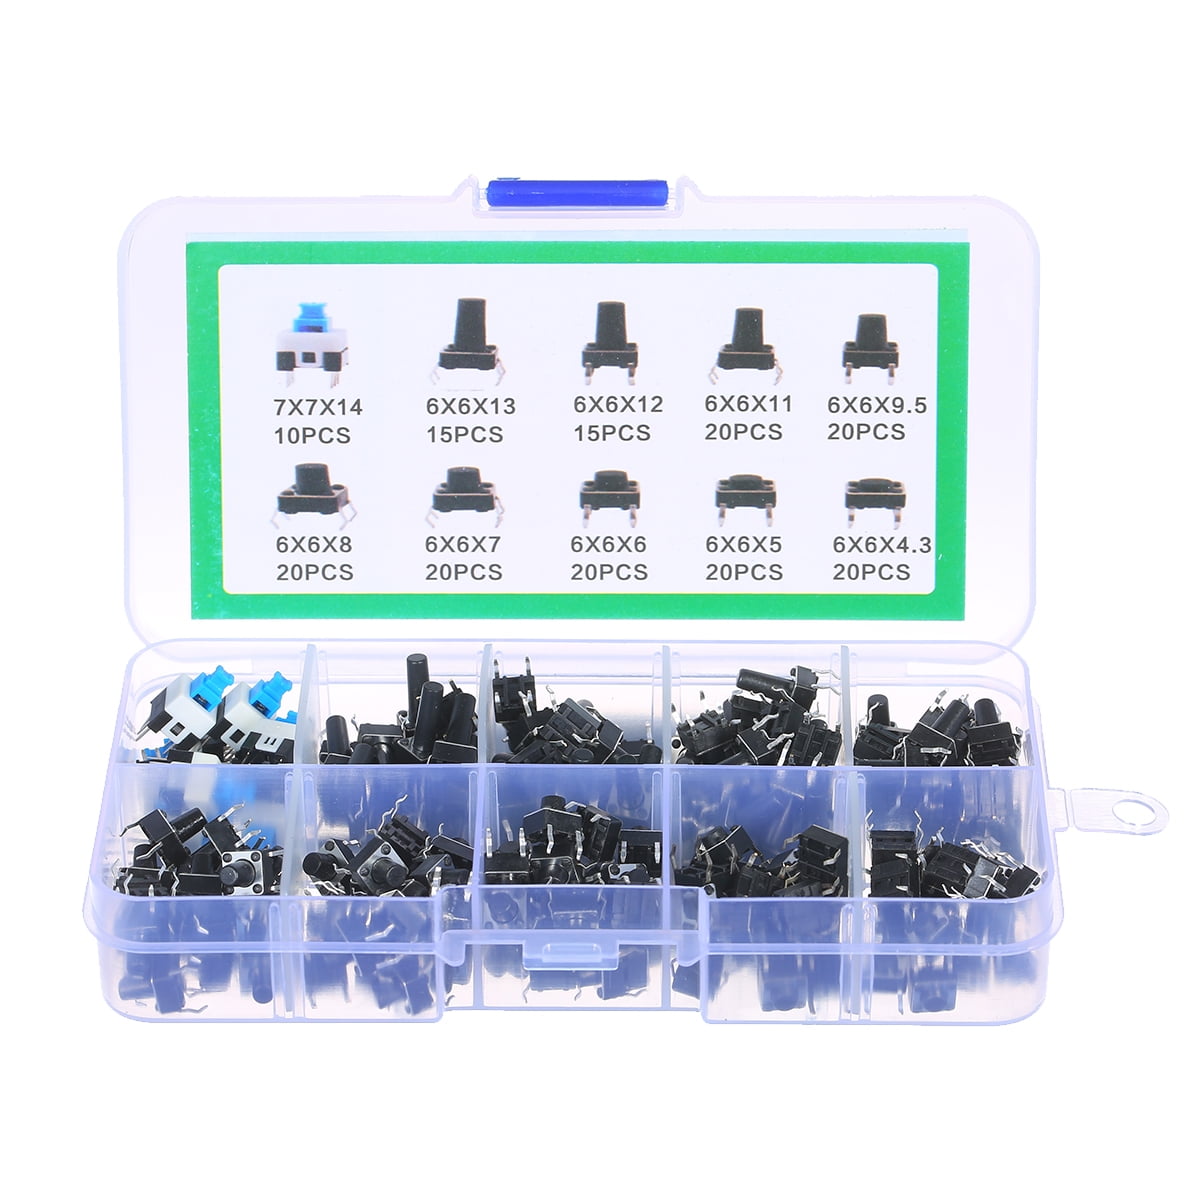 Blue Cap 20PCS 12 x 12mm x 11mm Momentary Tactile Tact Push Button Switch 